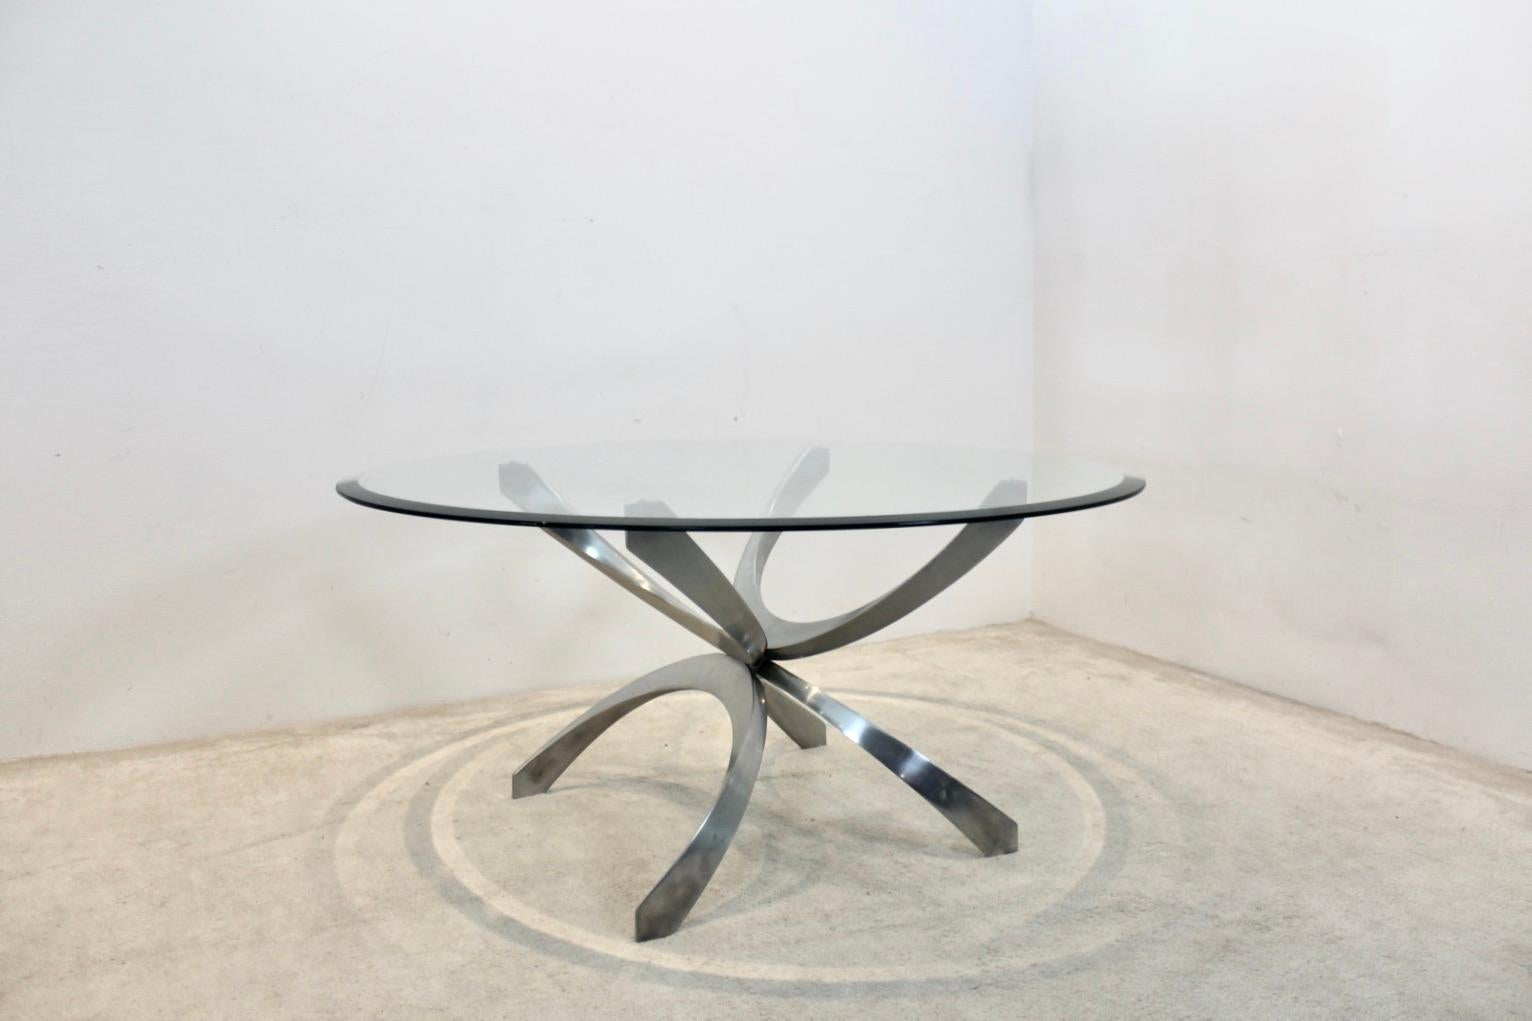 German Modernist Sculptural Aluminum and Glass Coffee Table by Knut Hesterberg, 1970s For Sale